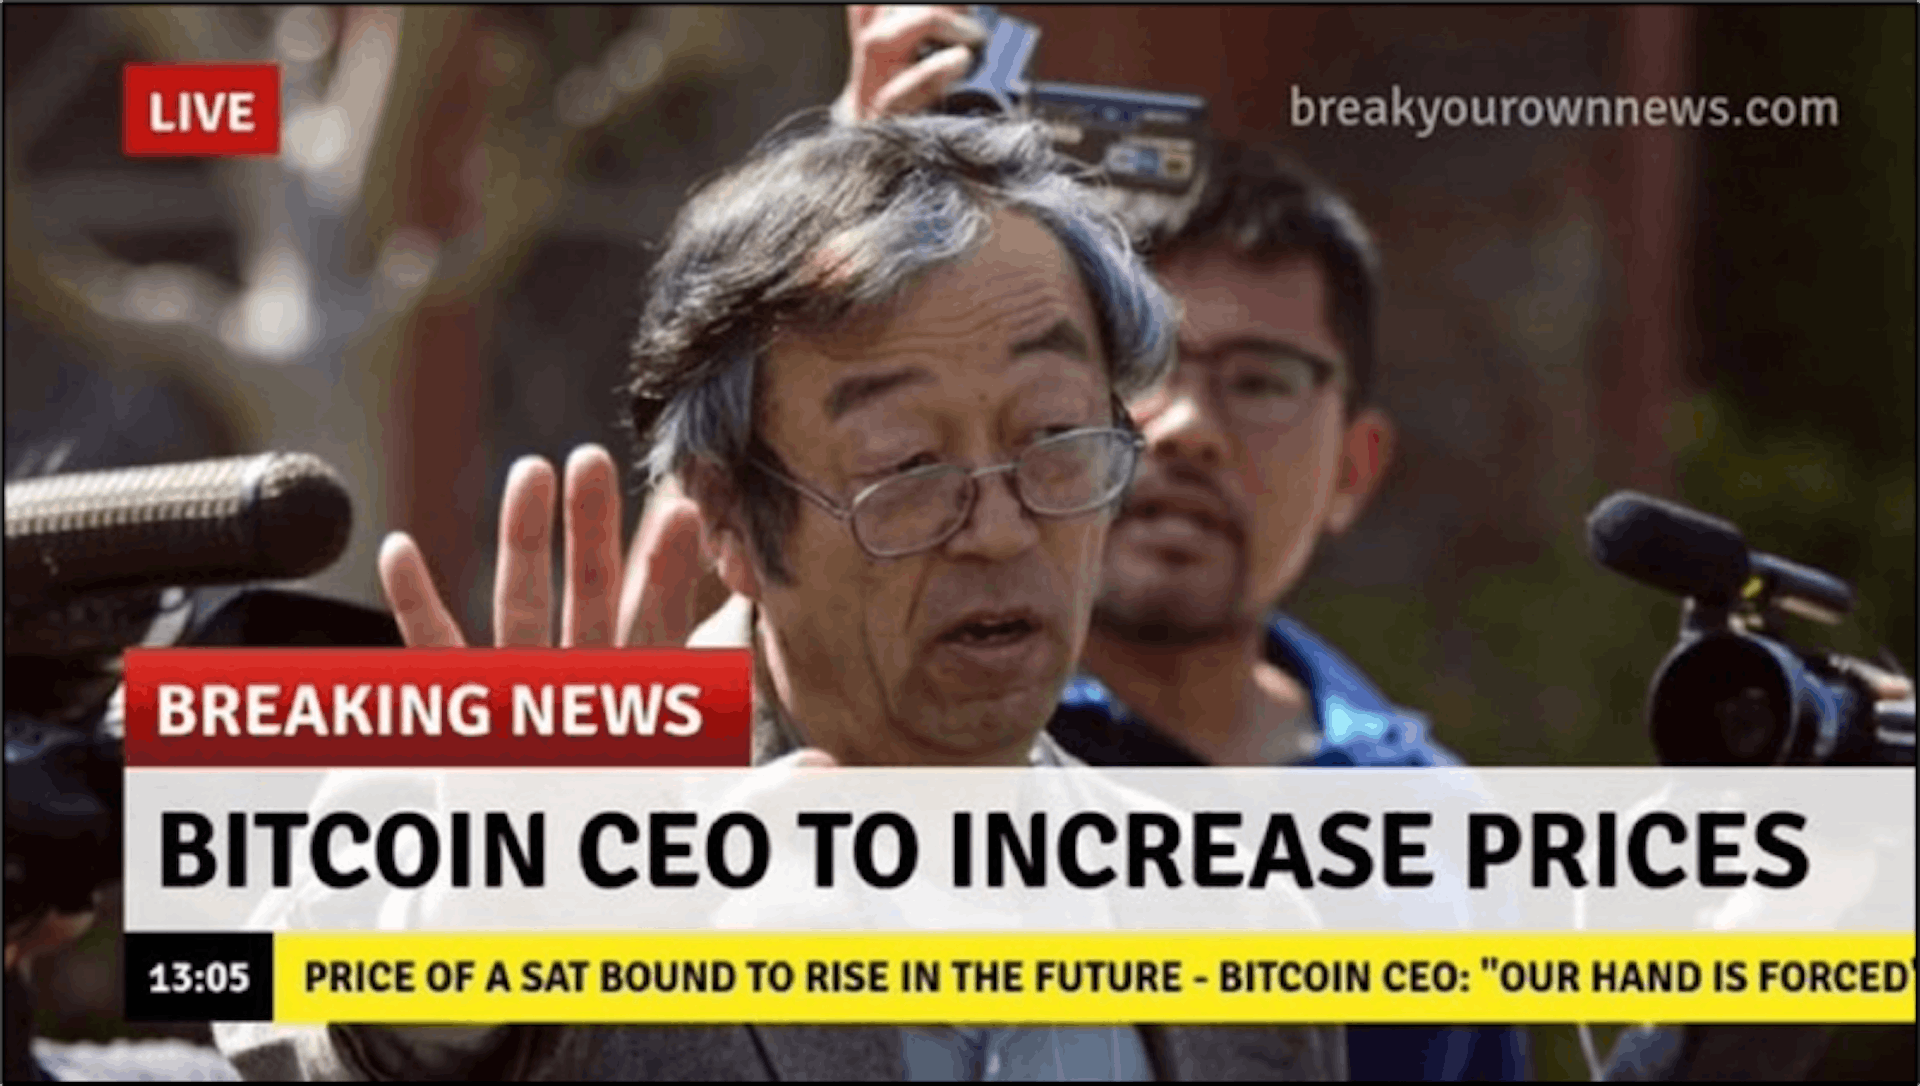 A puzzled Dorian Nakamoto addressing the press is a source of many Bitcoin memes